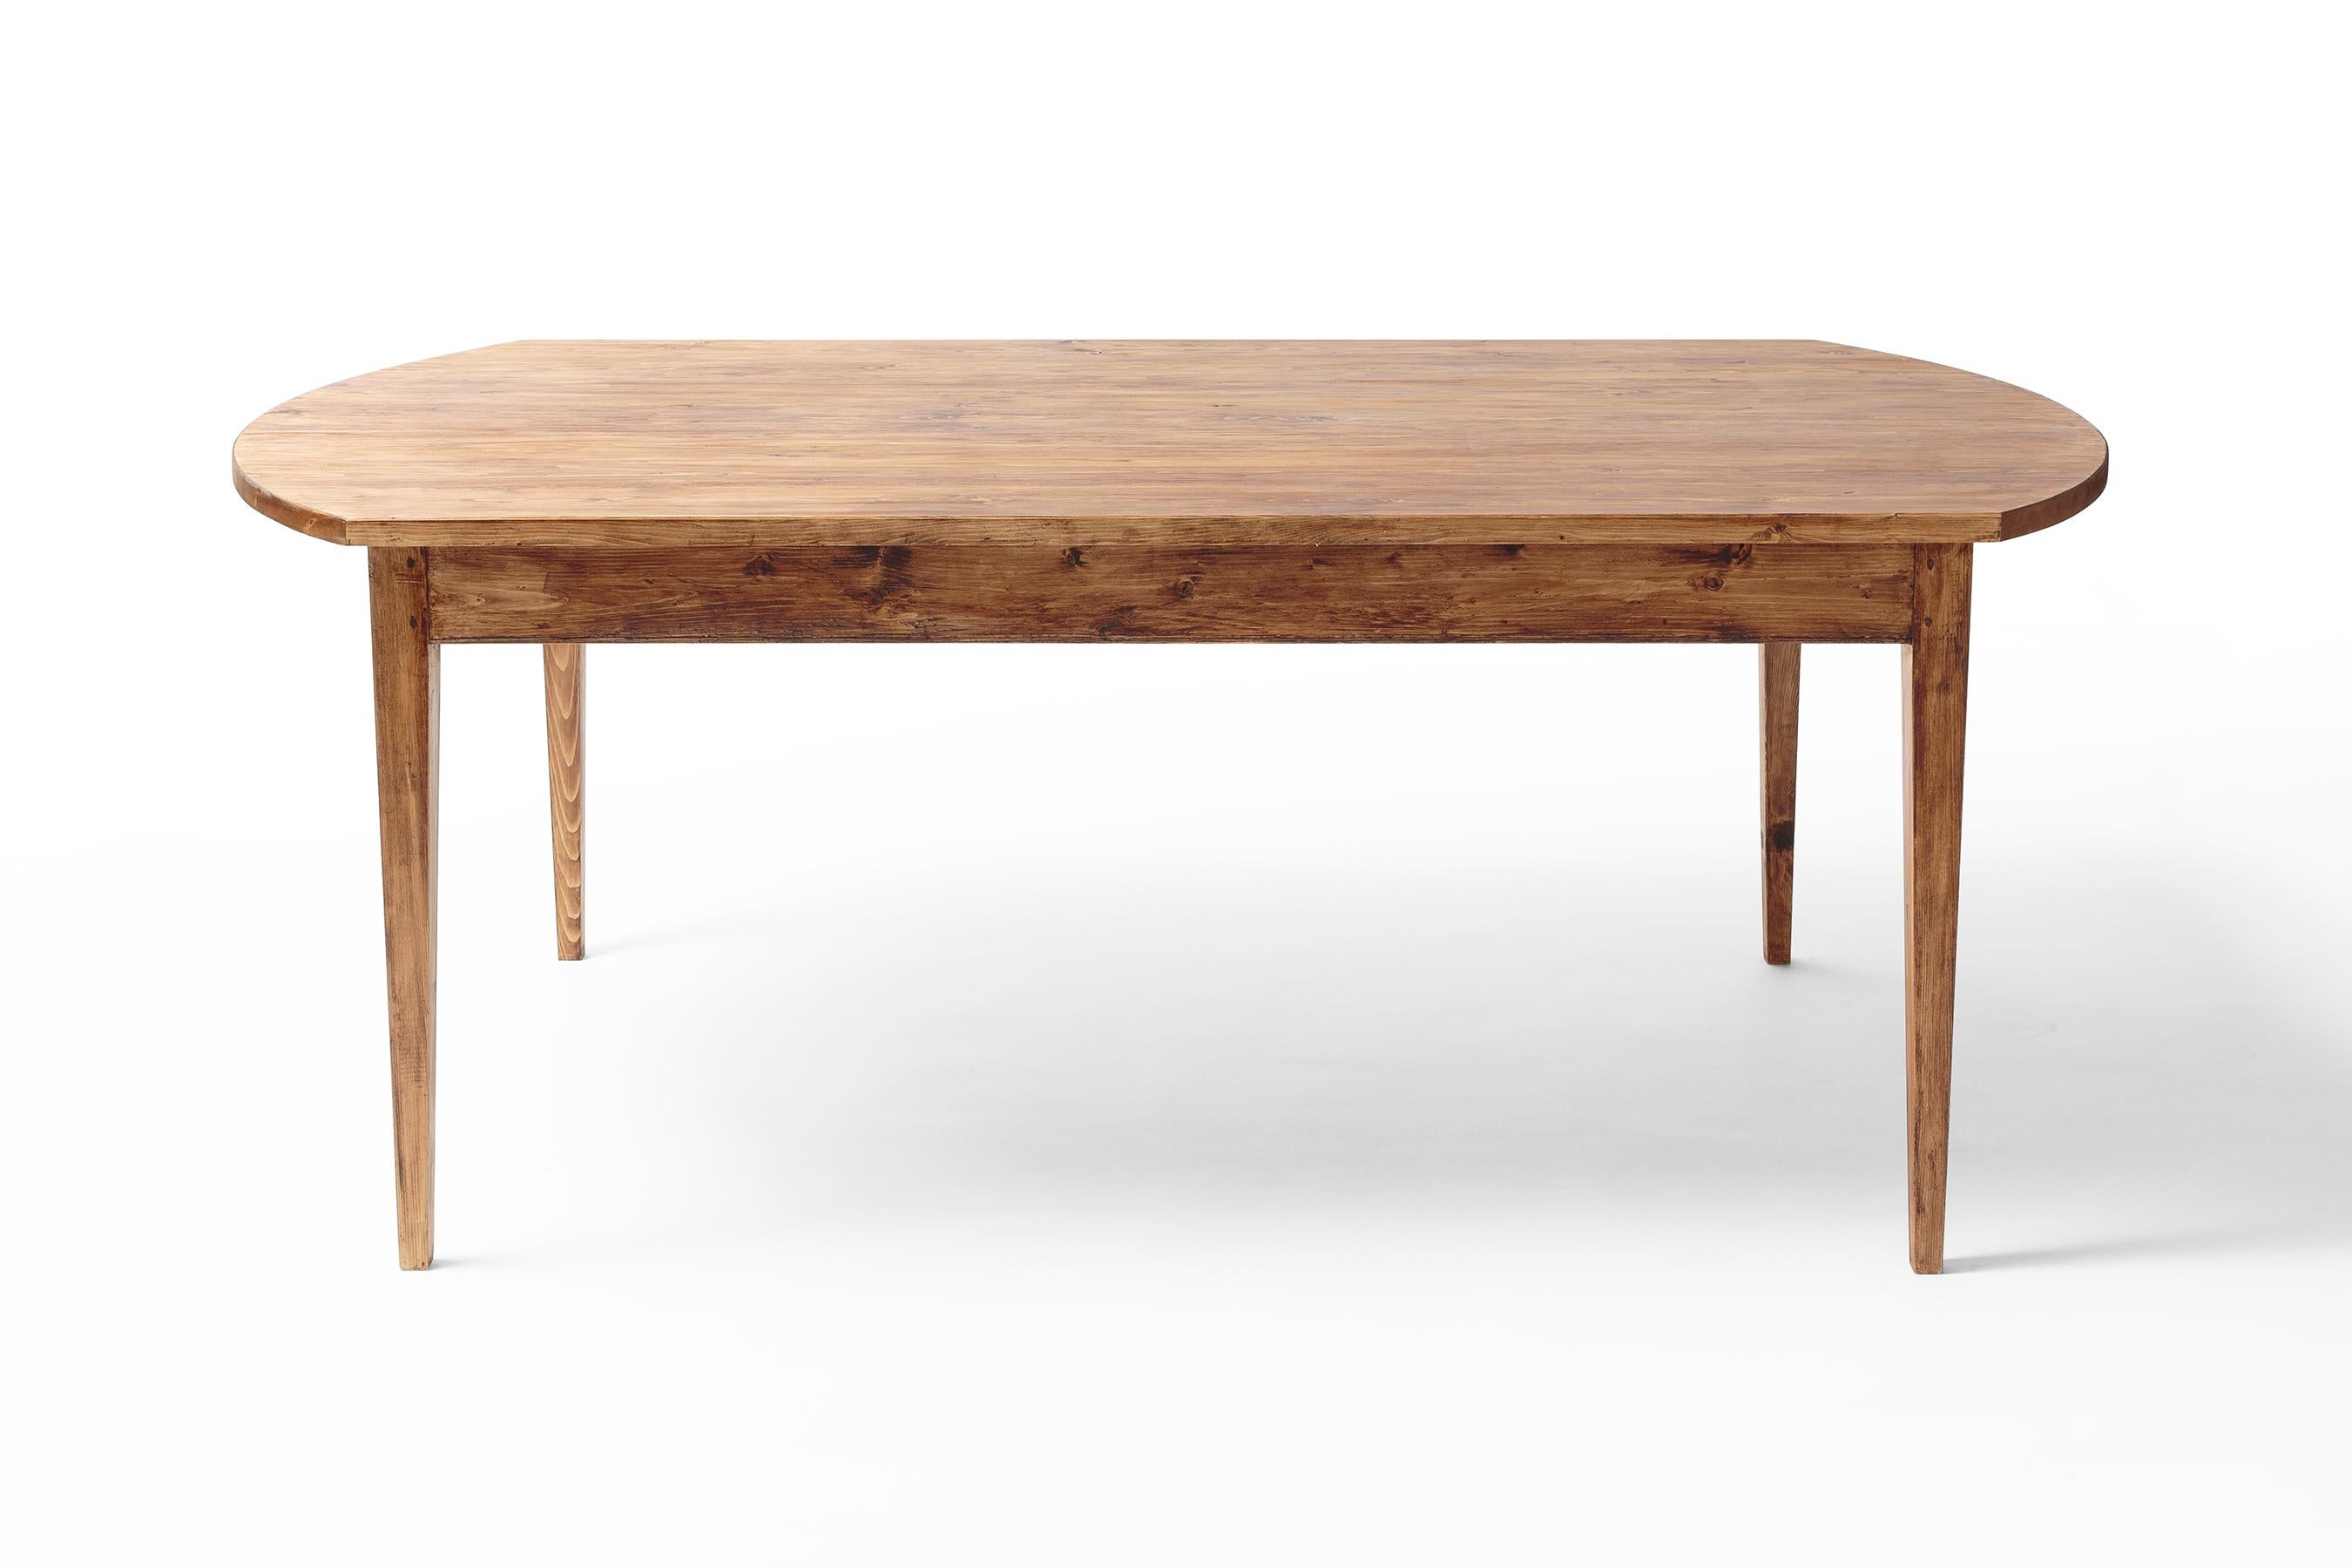 The Adair table is our tribute to English Rustic. Warm, inviting and a love letter to old world craftsmanship, featuring a hand-planed spruce top, pegged tenons, and a waxed finish.

